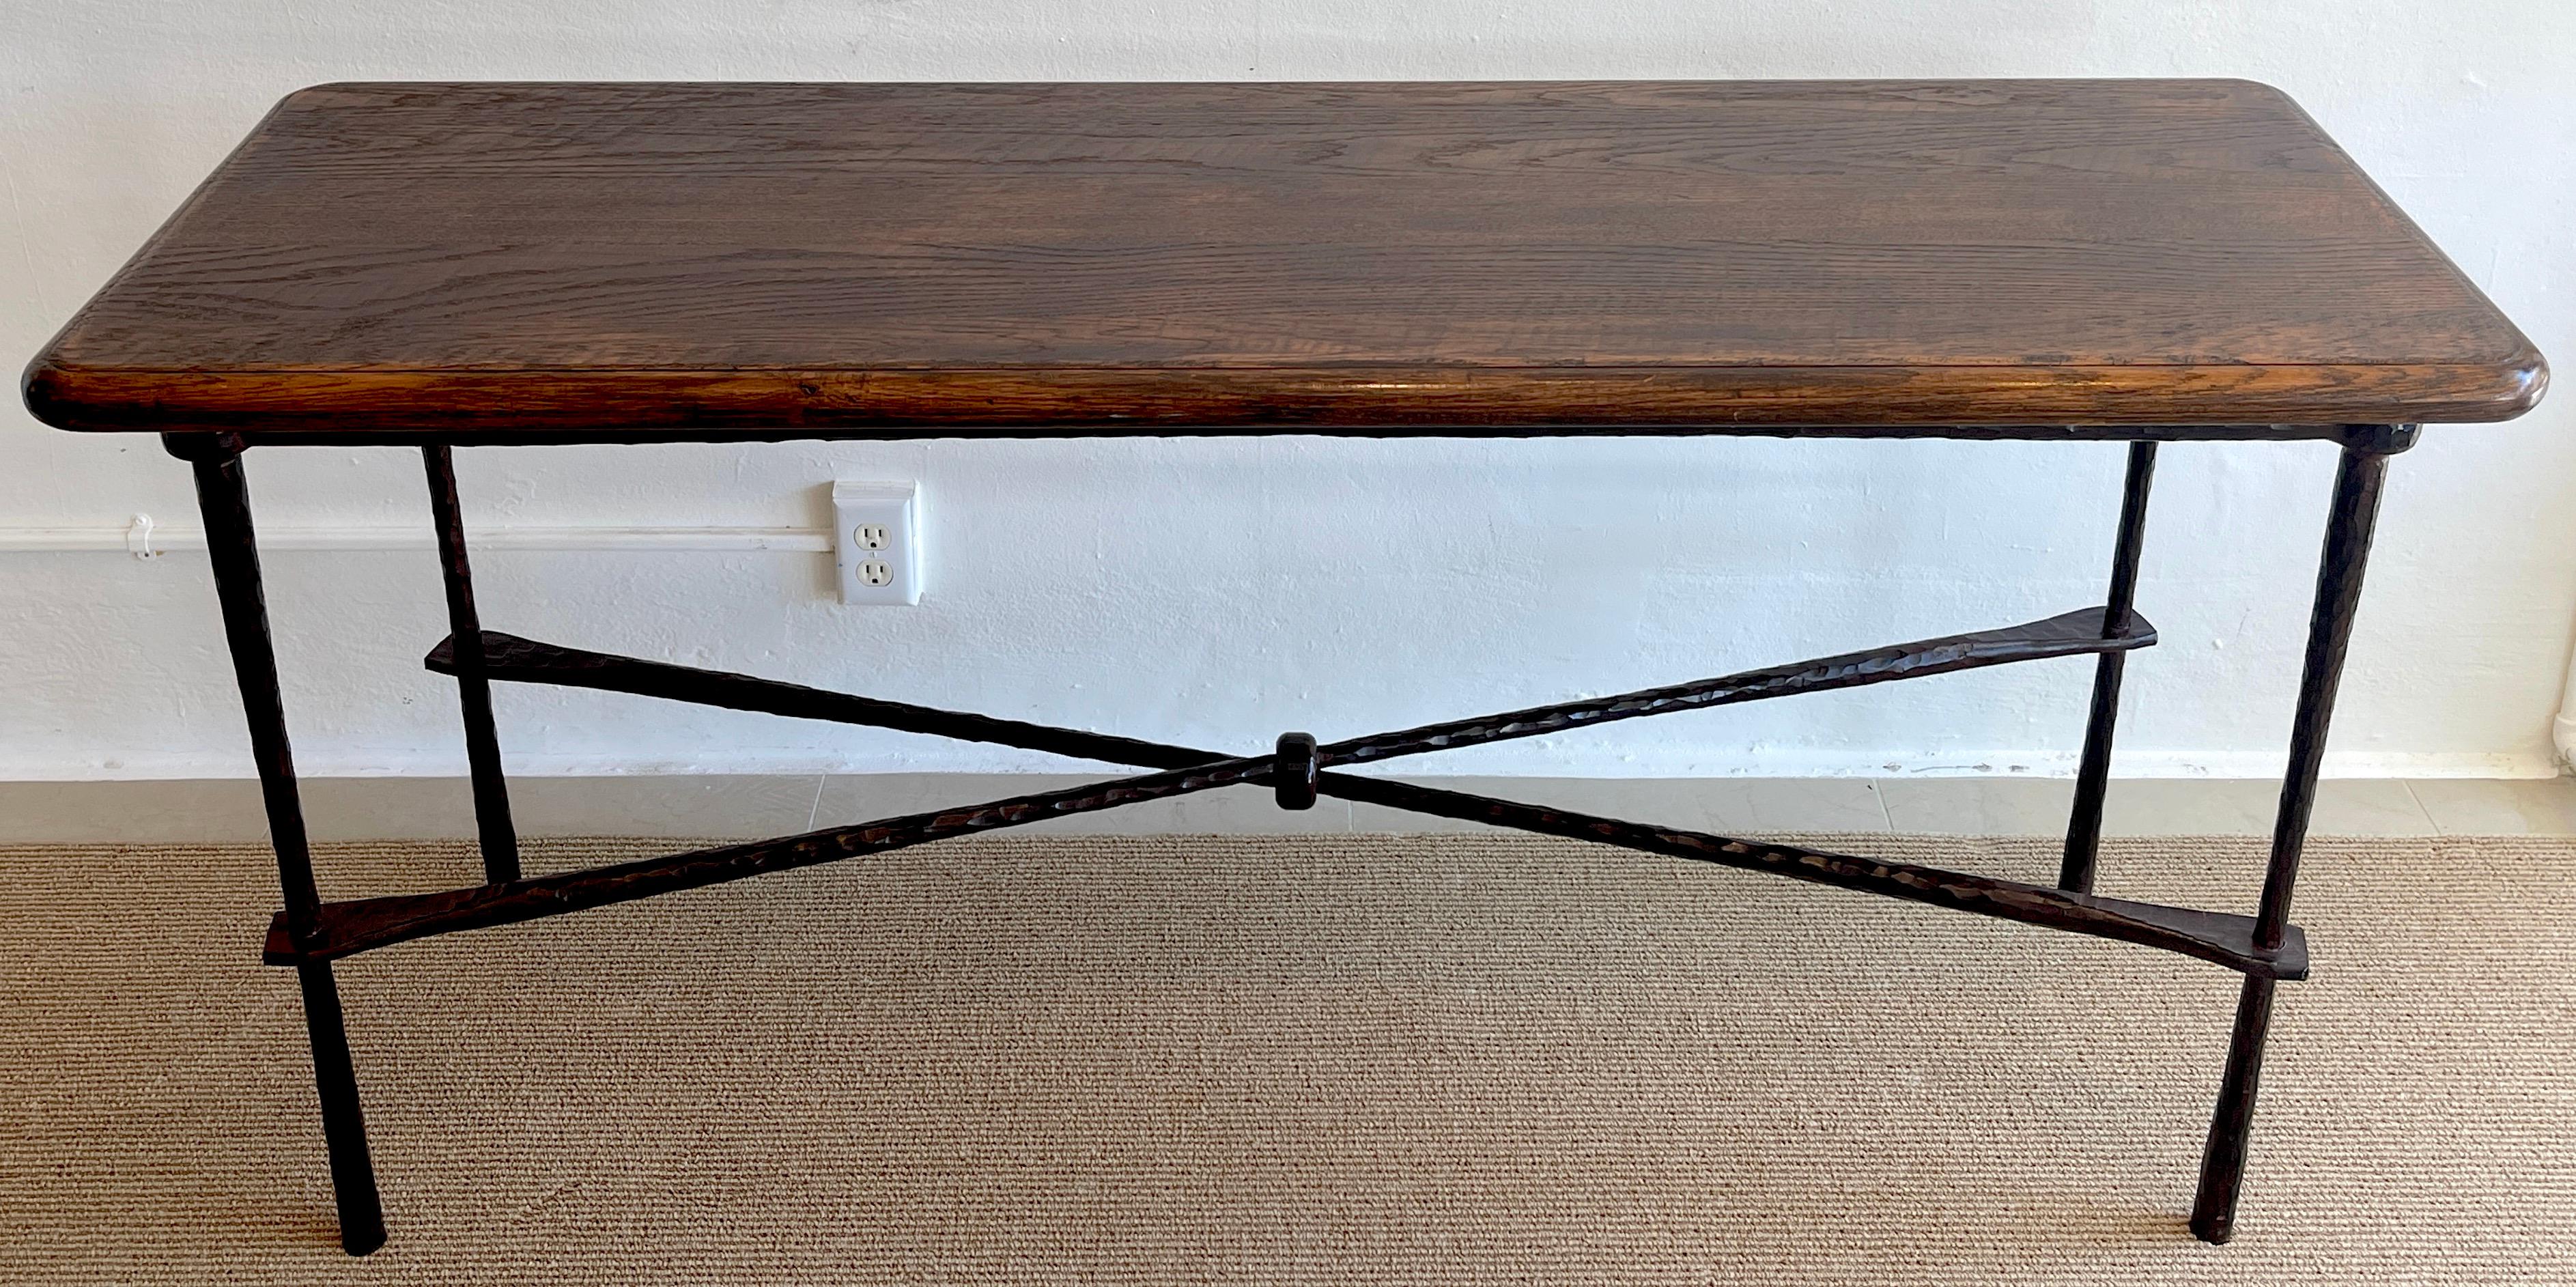 French modern wrought iron & walnut console table, of rectangular form with thick natural walnut top, on a substantial forged iron 'X